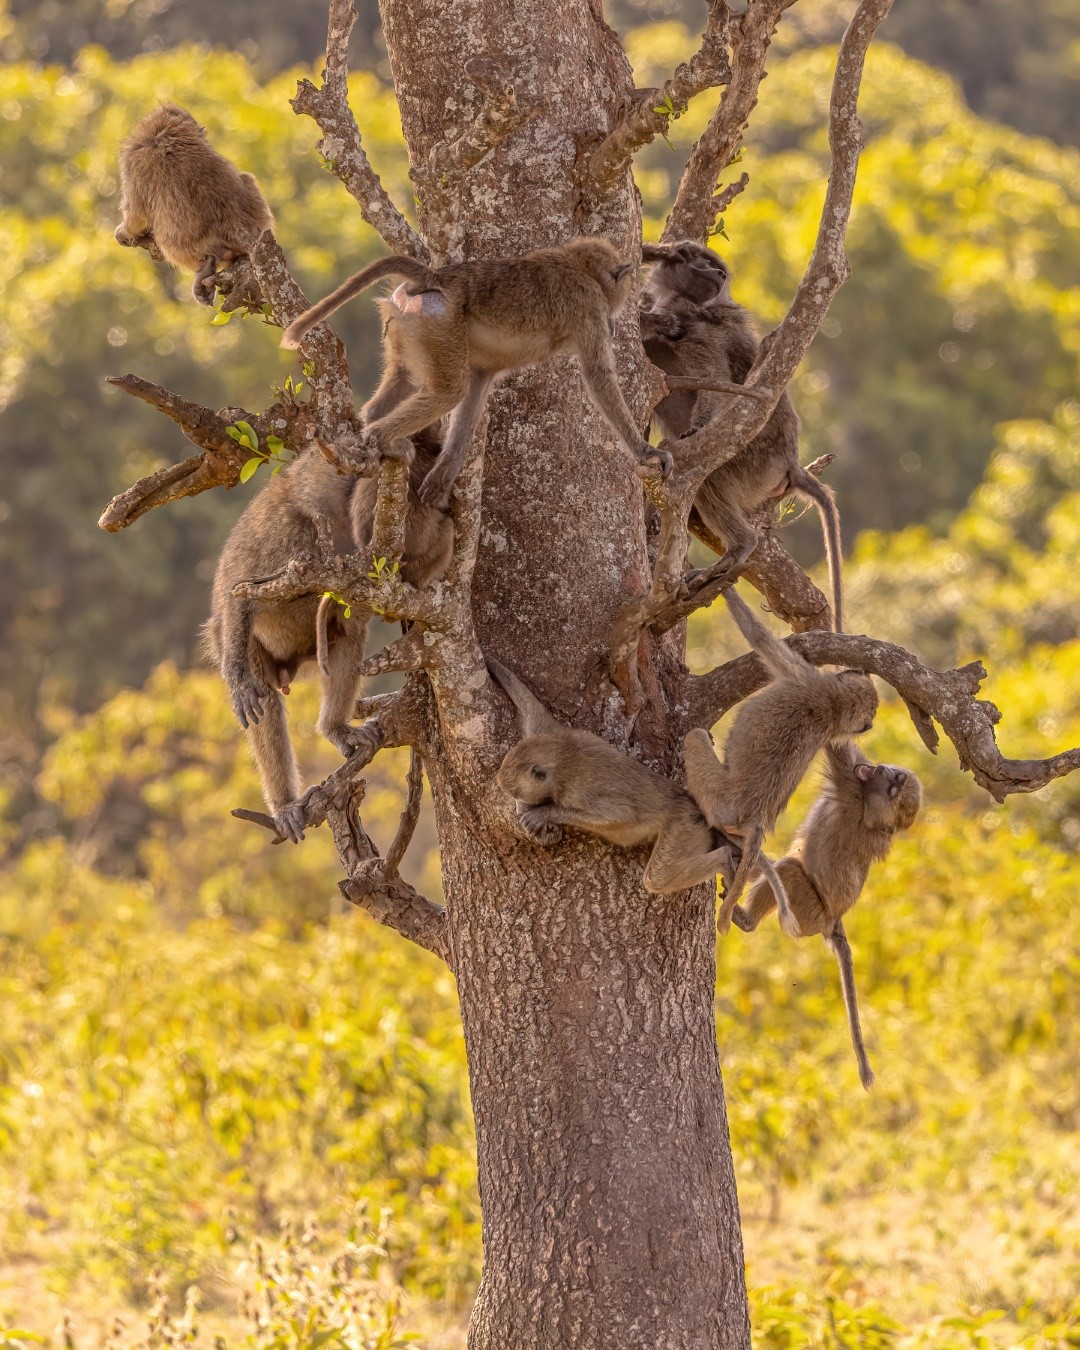 _C0A5598 - Olive Baboons Monkeying Around.jpg